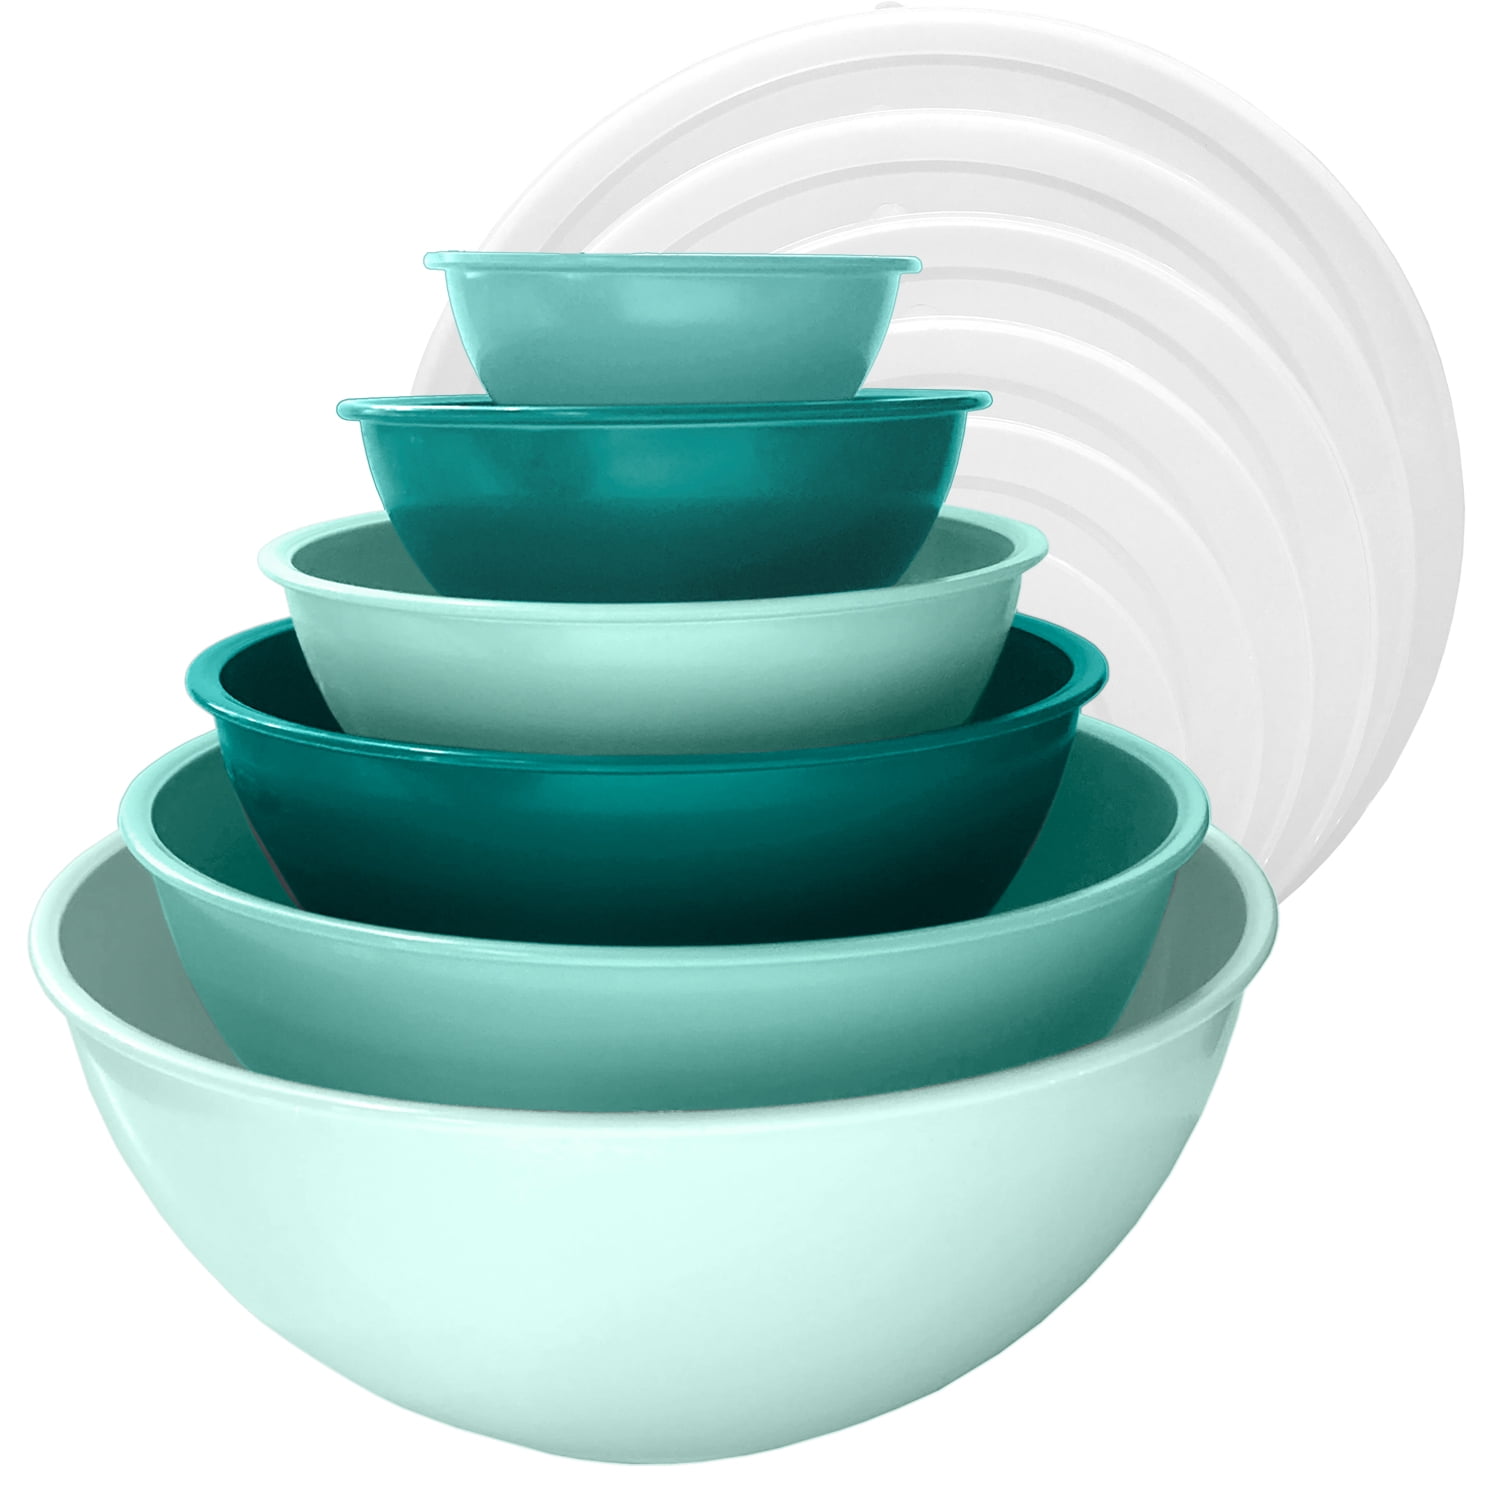 lok-osemile melamine mixing bowls with lids - 12 piece nesting bowls set 6  bowls and 6